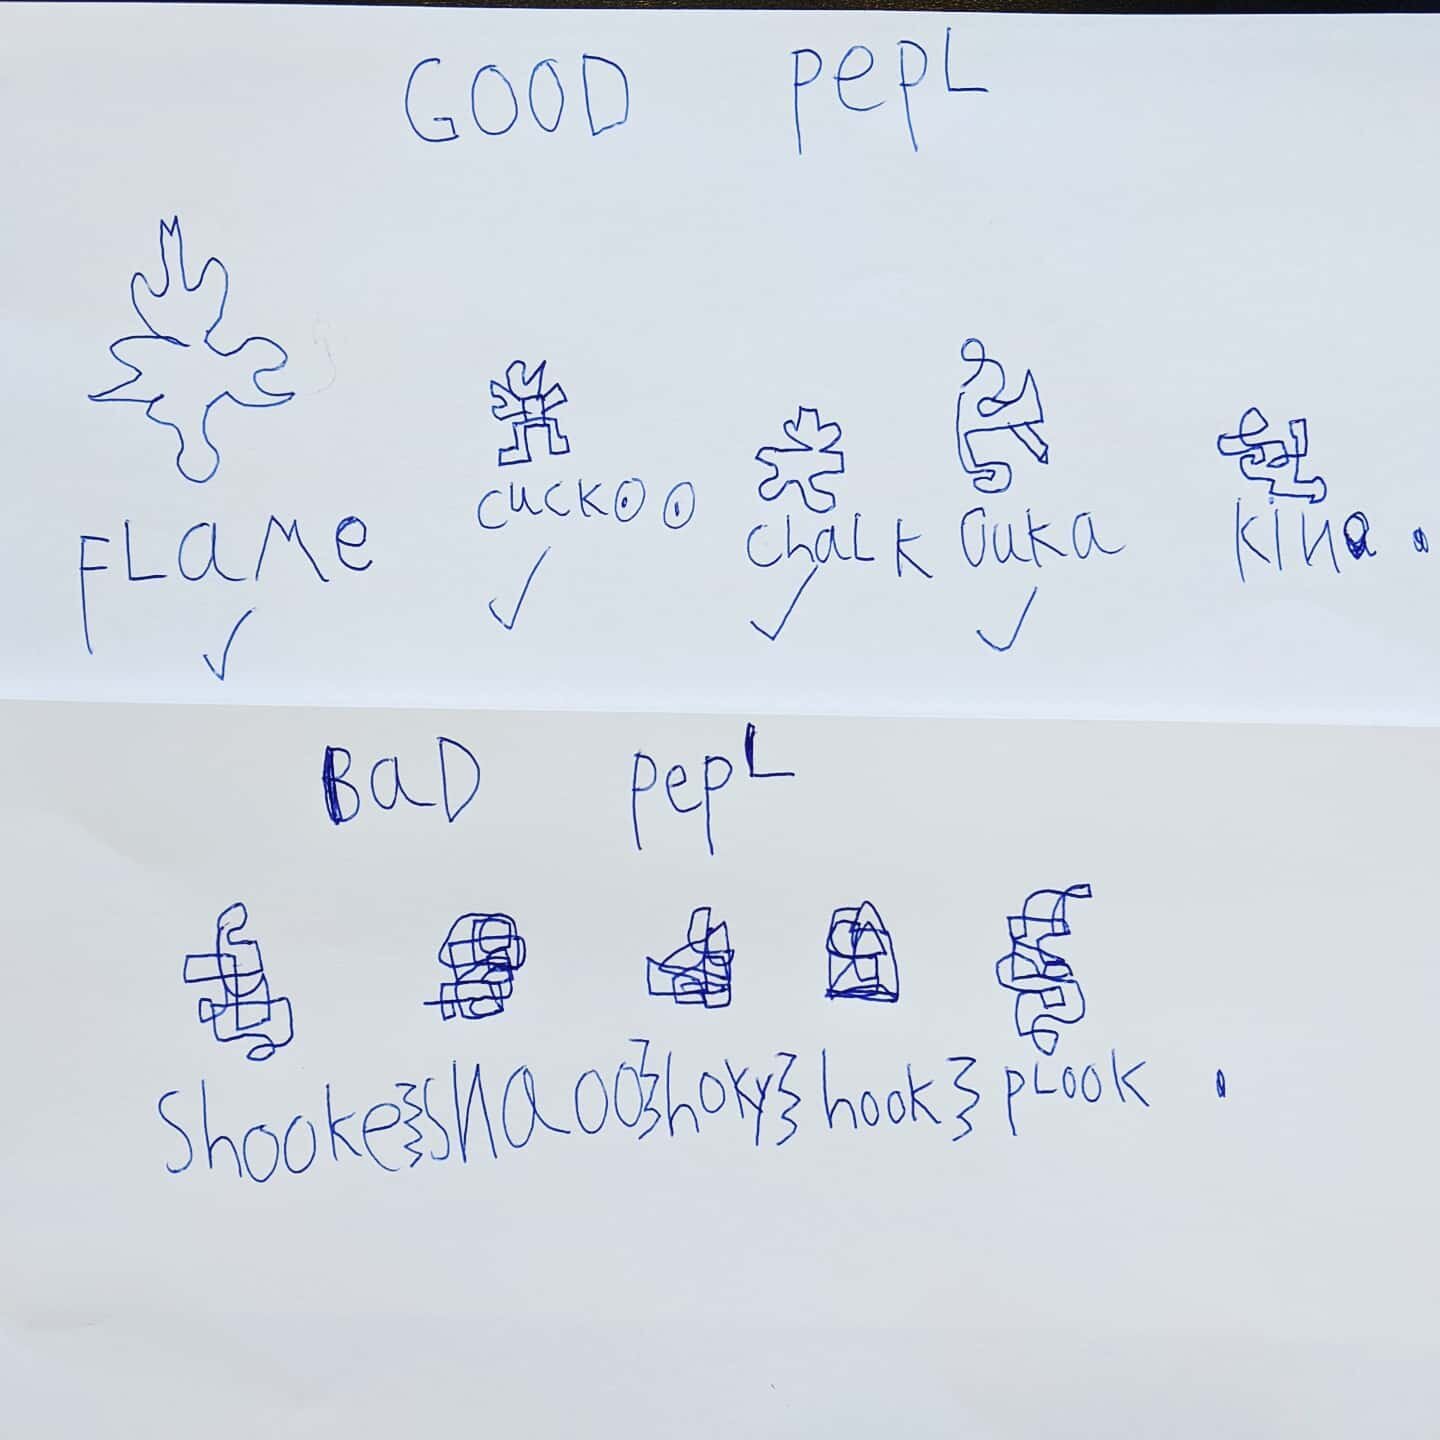 Here's a list of good vs bad people from my 7-year-old.  Note that he referred to these as &quot;characters&quot;, perfectly utilizing both definitions of the word, I think.⁣⁣
⁣⁣
Good pepl: Flame, Cuckoo, Chalk, Ouka, Kino.⁣⁣
Bad pepl: Shooke, Snaoo,